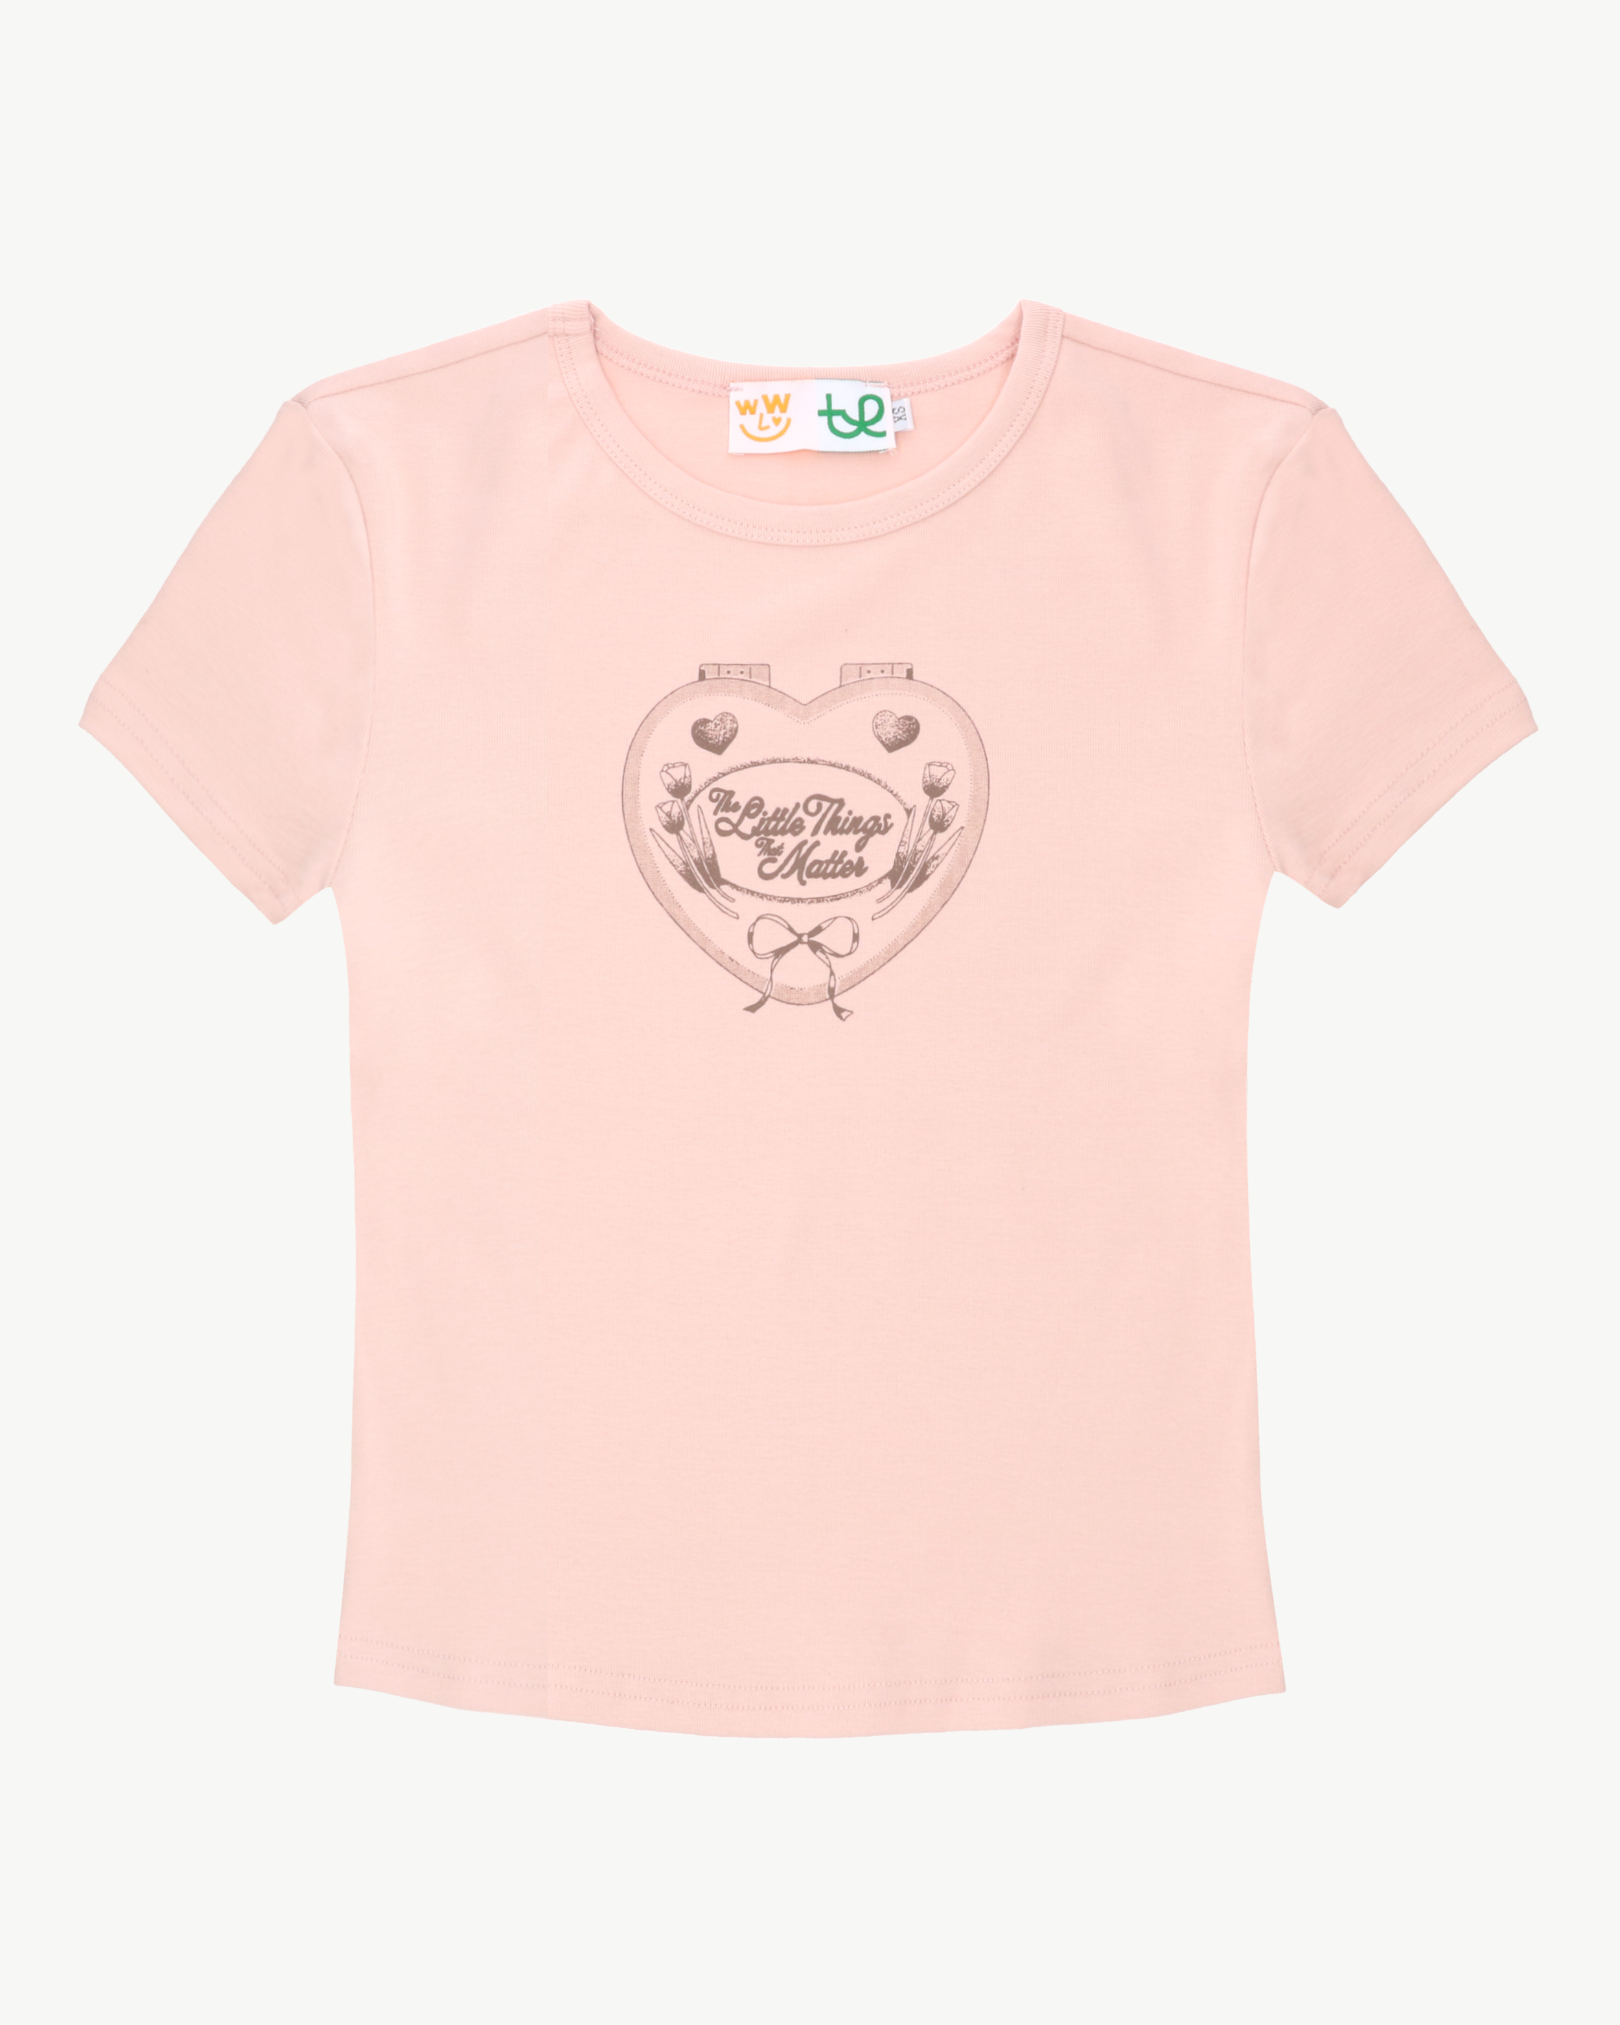 The Little Things That Matter Baby Tee - Baby Pink